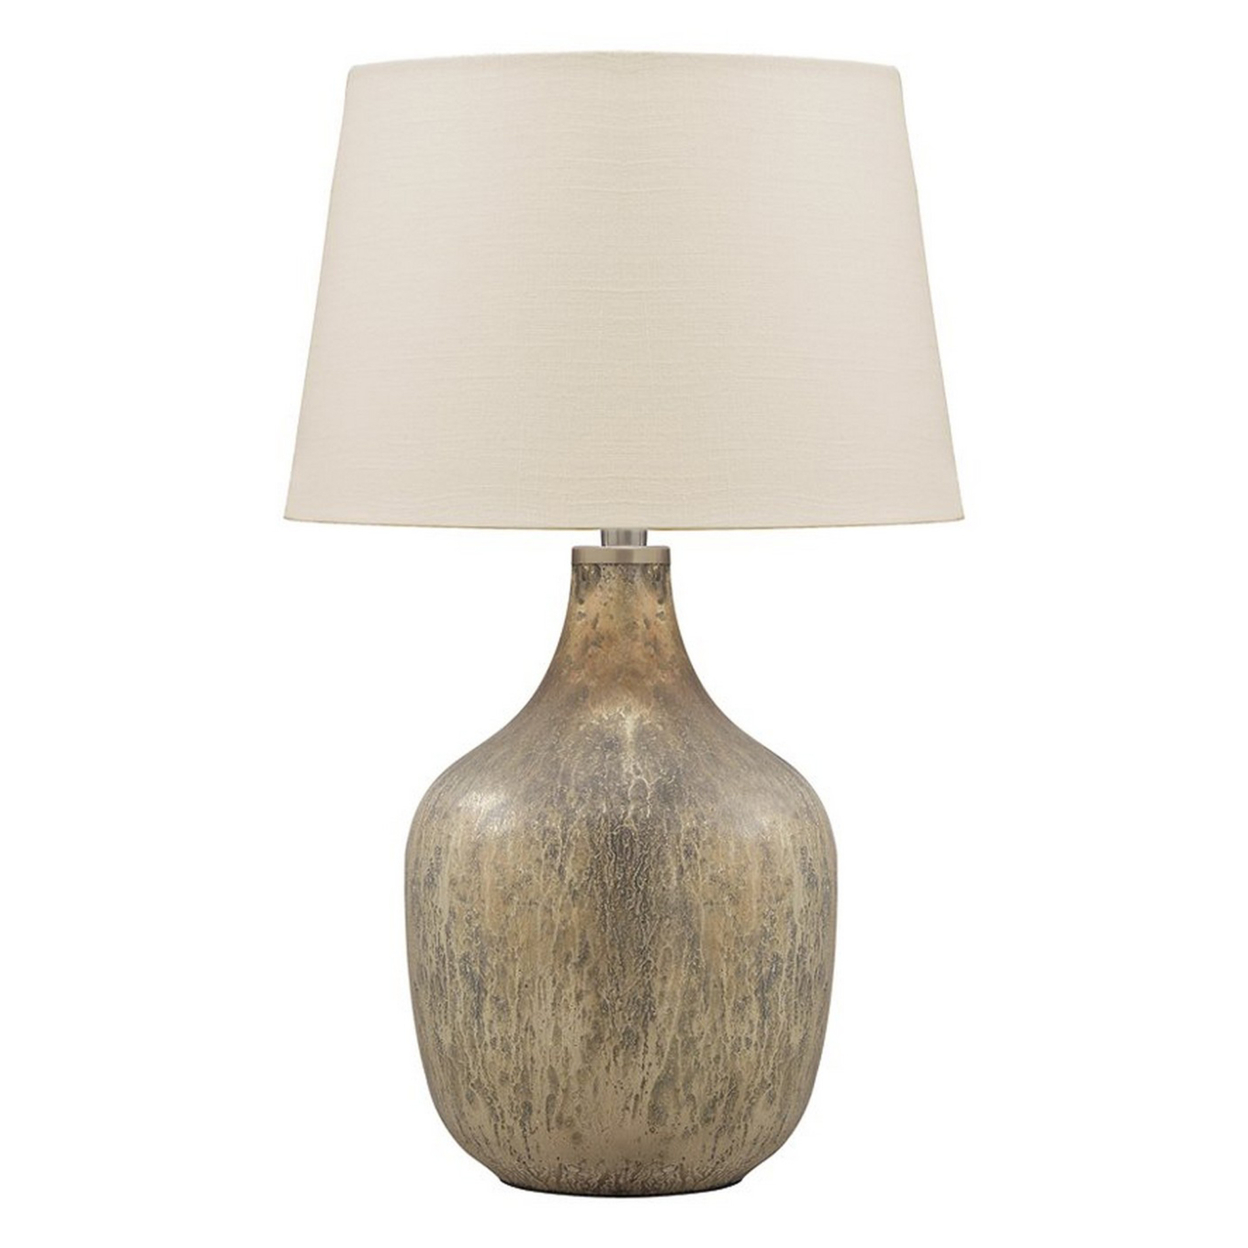 Mercury Glass Table Lamp With Drum Shade, Gold And Beige- Saltoro Sherpi